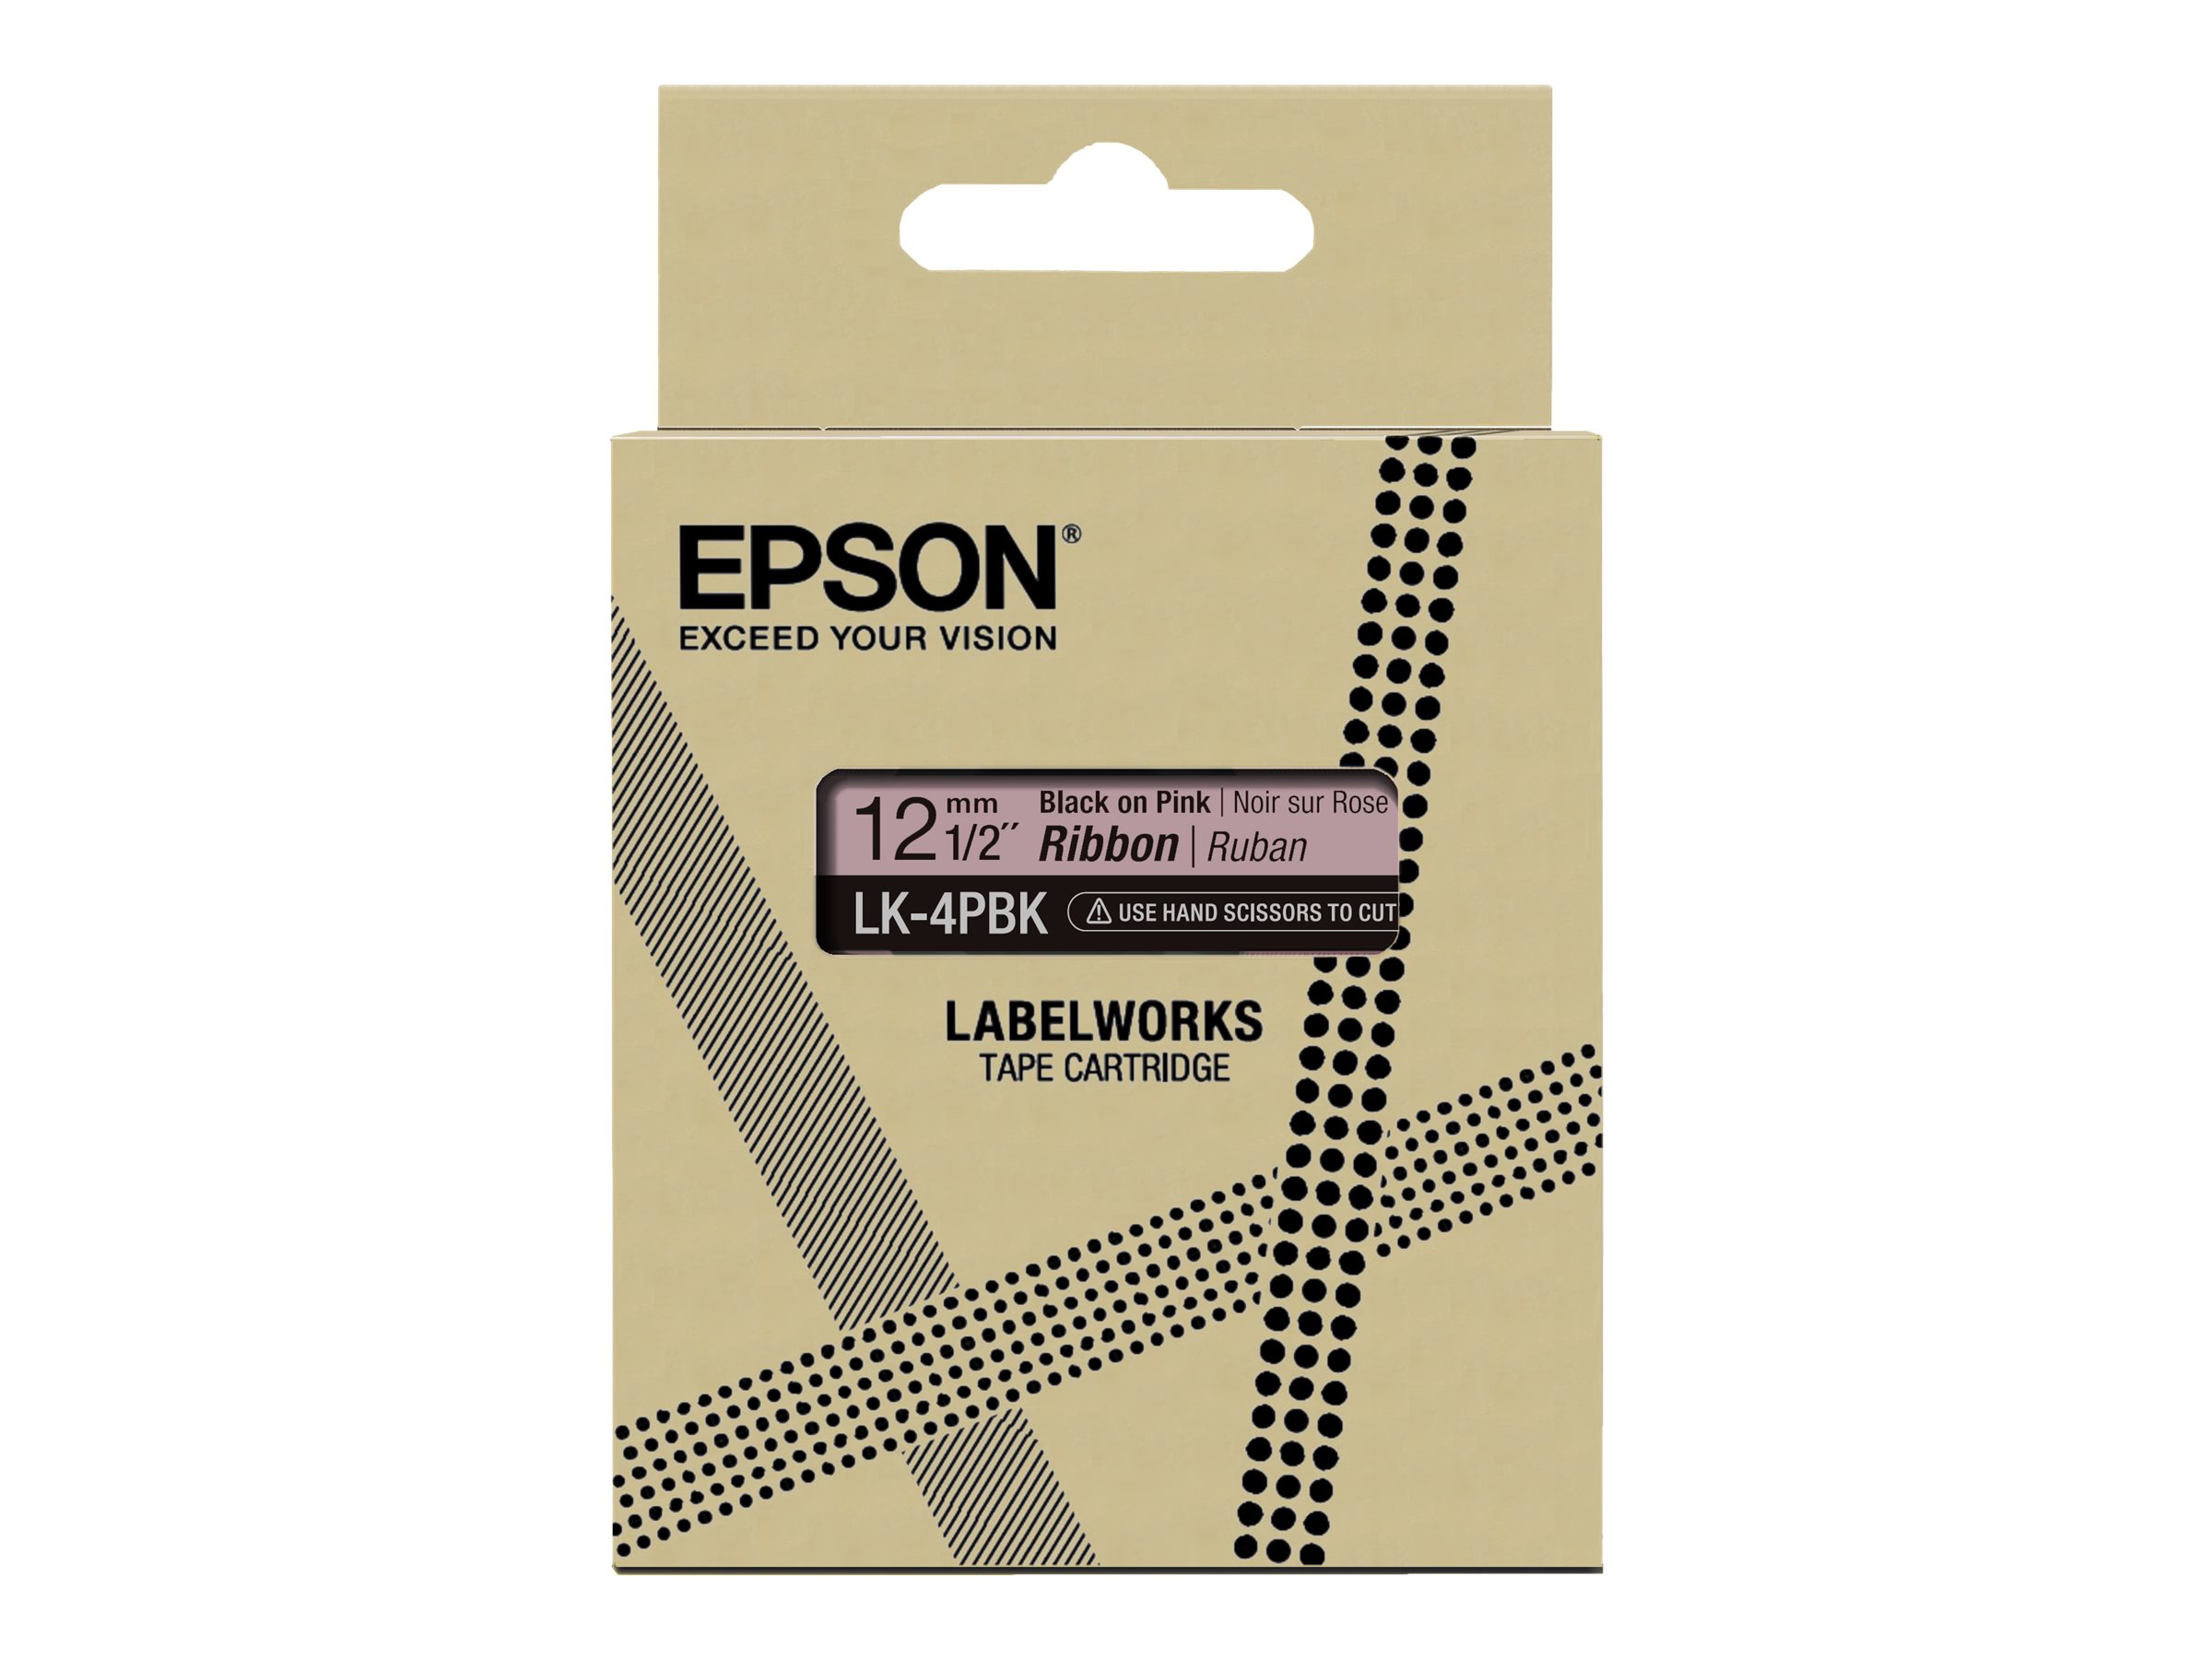 Epson LabelWorks LK-4PBK - Seidig - Schwarz auf Pink - Rolle (1,2 cm x 5 m) 1 Kassette(n) Band - fr LabelWorks Cable and Wiring